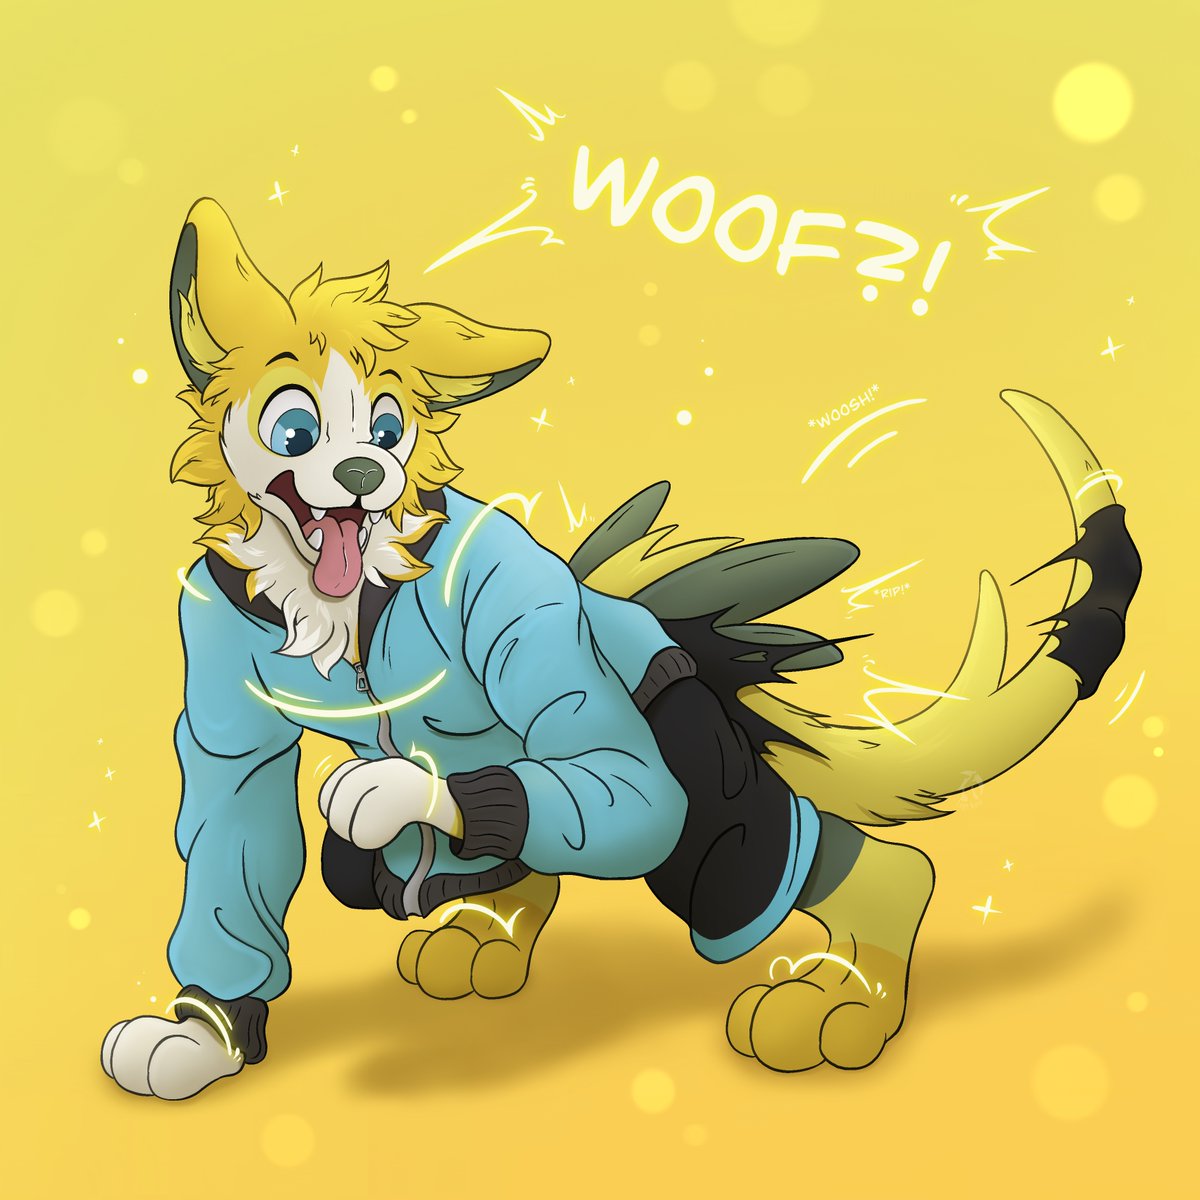 @Pawzut should have realised that if you woof too often then you may just end up woofing for real #TFTuesday #furryart